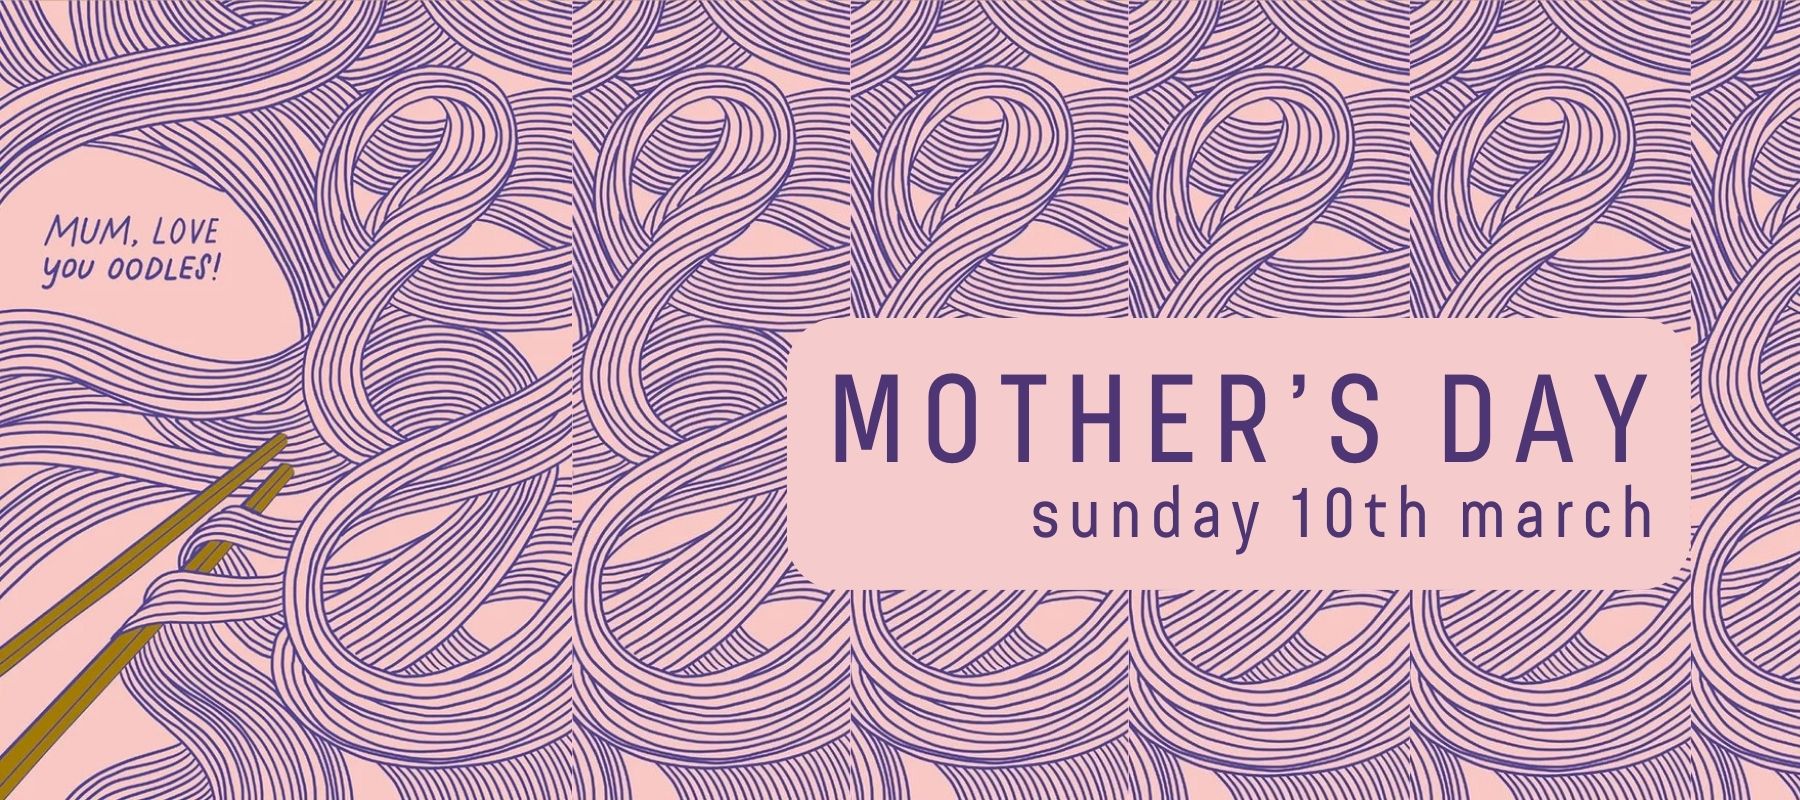 Mother's Day Cards and Gifts at Penny Black